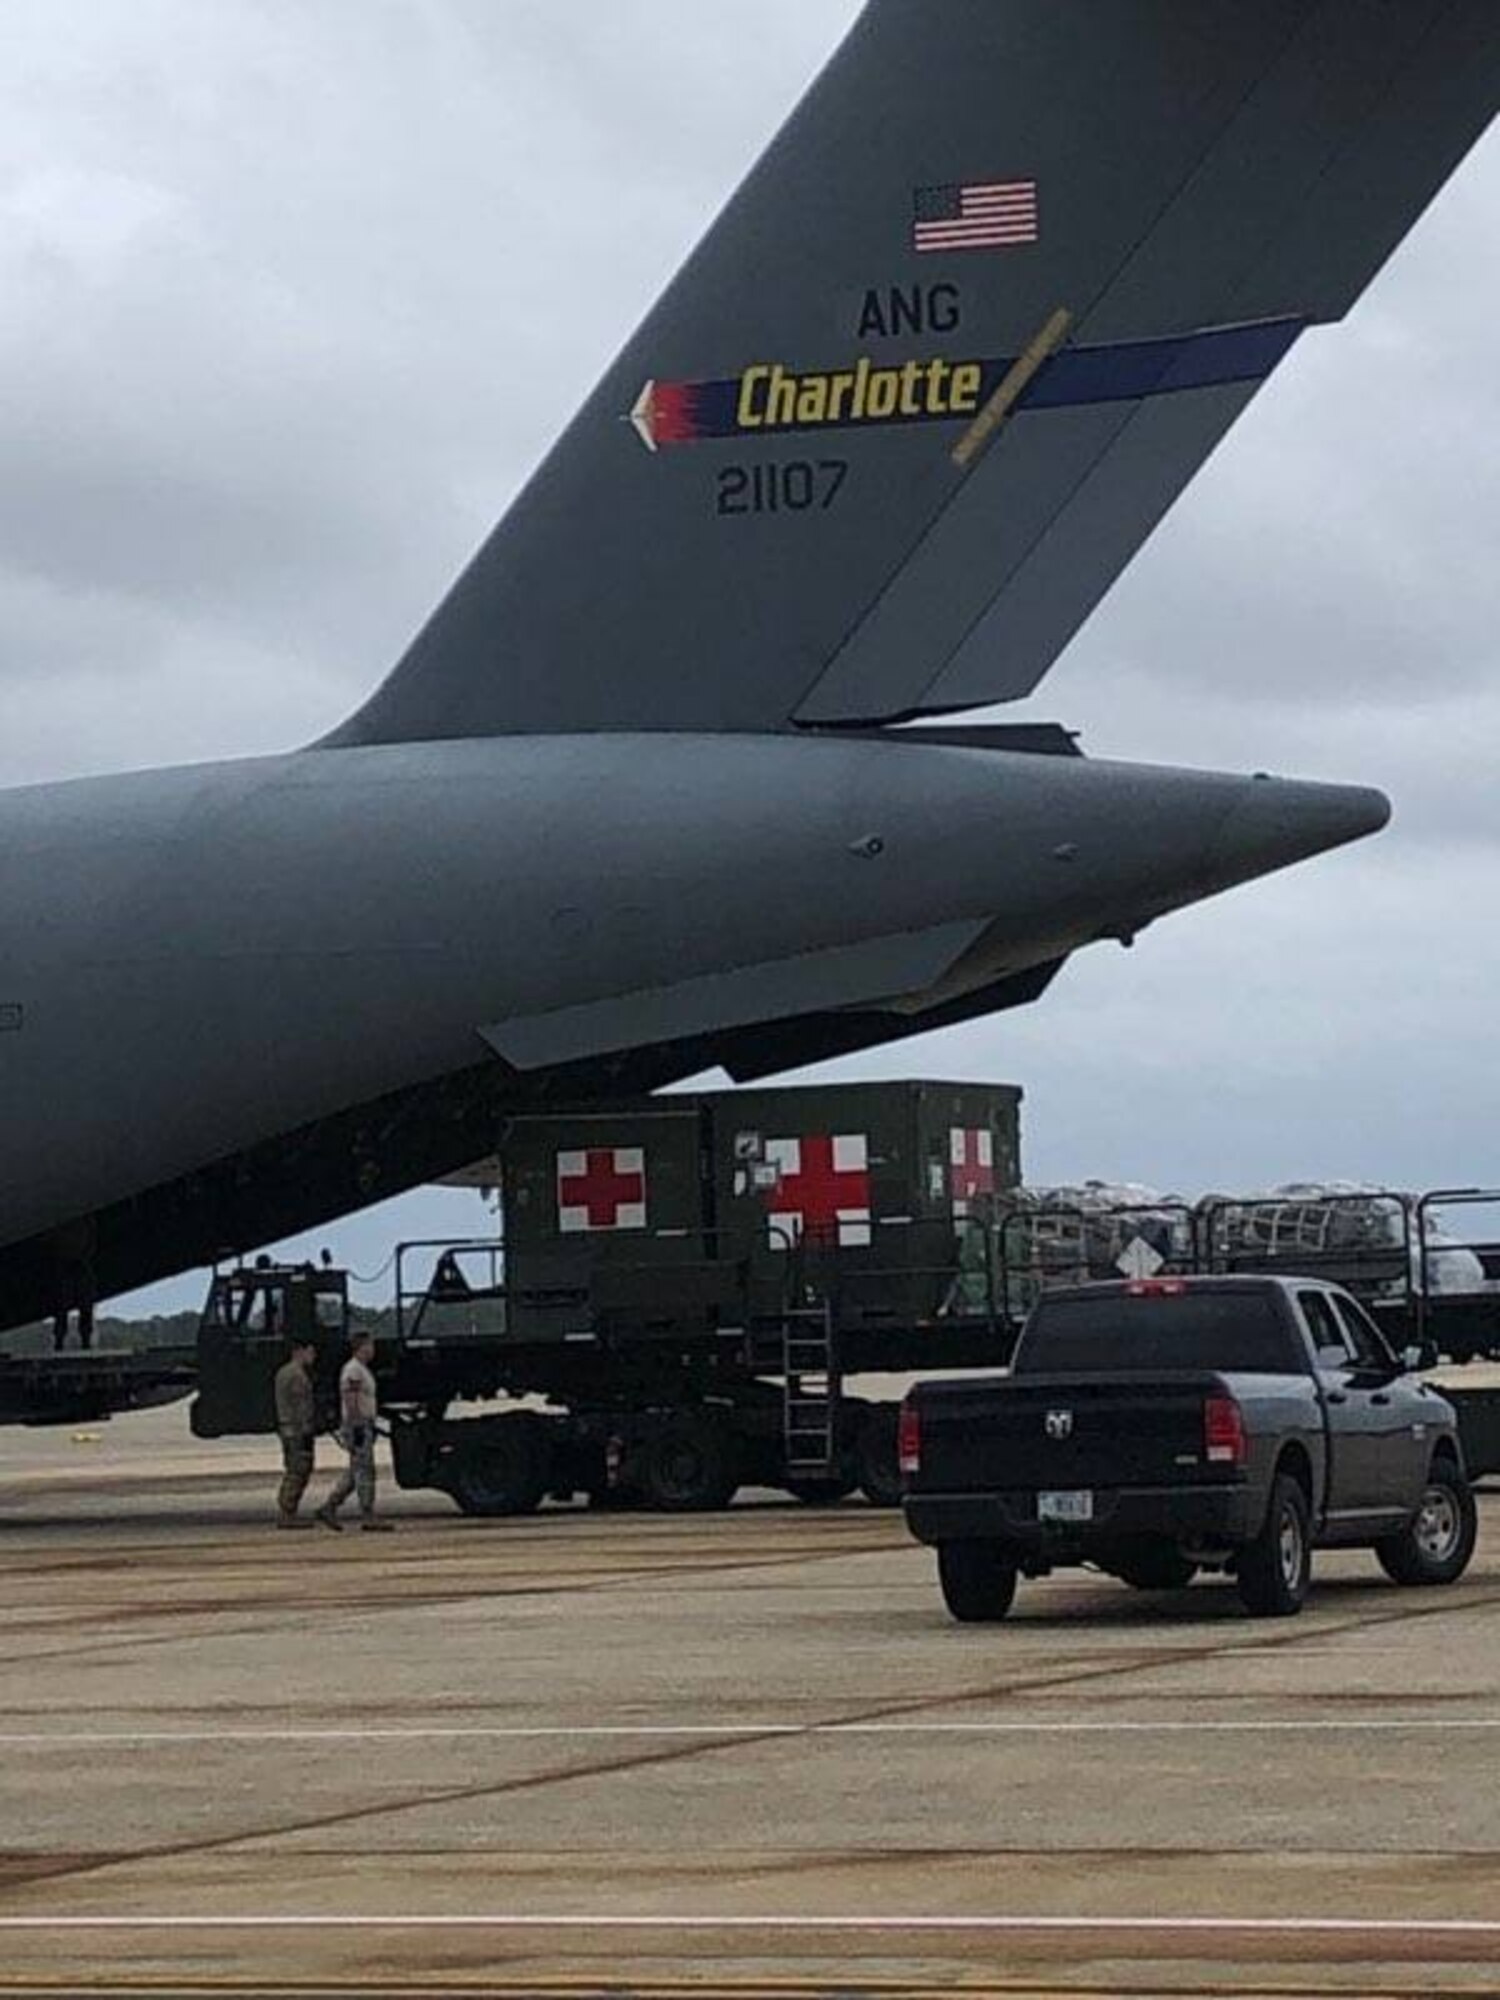 The C-17 Aircrew from the 145th Airlift Wing in Charlotte North Carolina participate in the Aeromedical Evacuation Patient Distribution Channel; a mission that is constantly in force moving patients, and casualties of war inflicted wounds, in need of transport from one medical facility to another across the world, while at Andrews Air Force Base, Sept 2, 2019. This is the North Carolina Air National Guard’s first real world C-17 mission since converting from the C-130 Hercules in 2017, the AE mission lasts for four months at a time with units swapping out after each rotation.